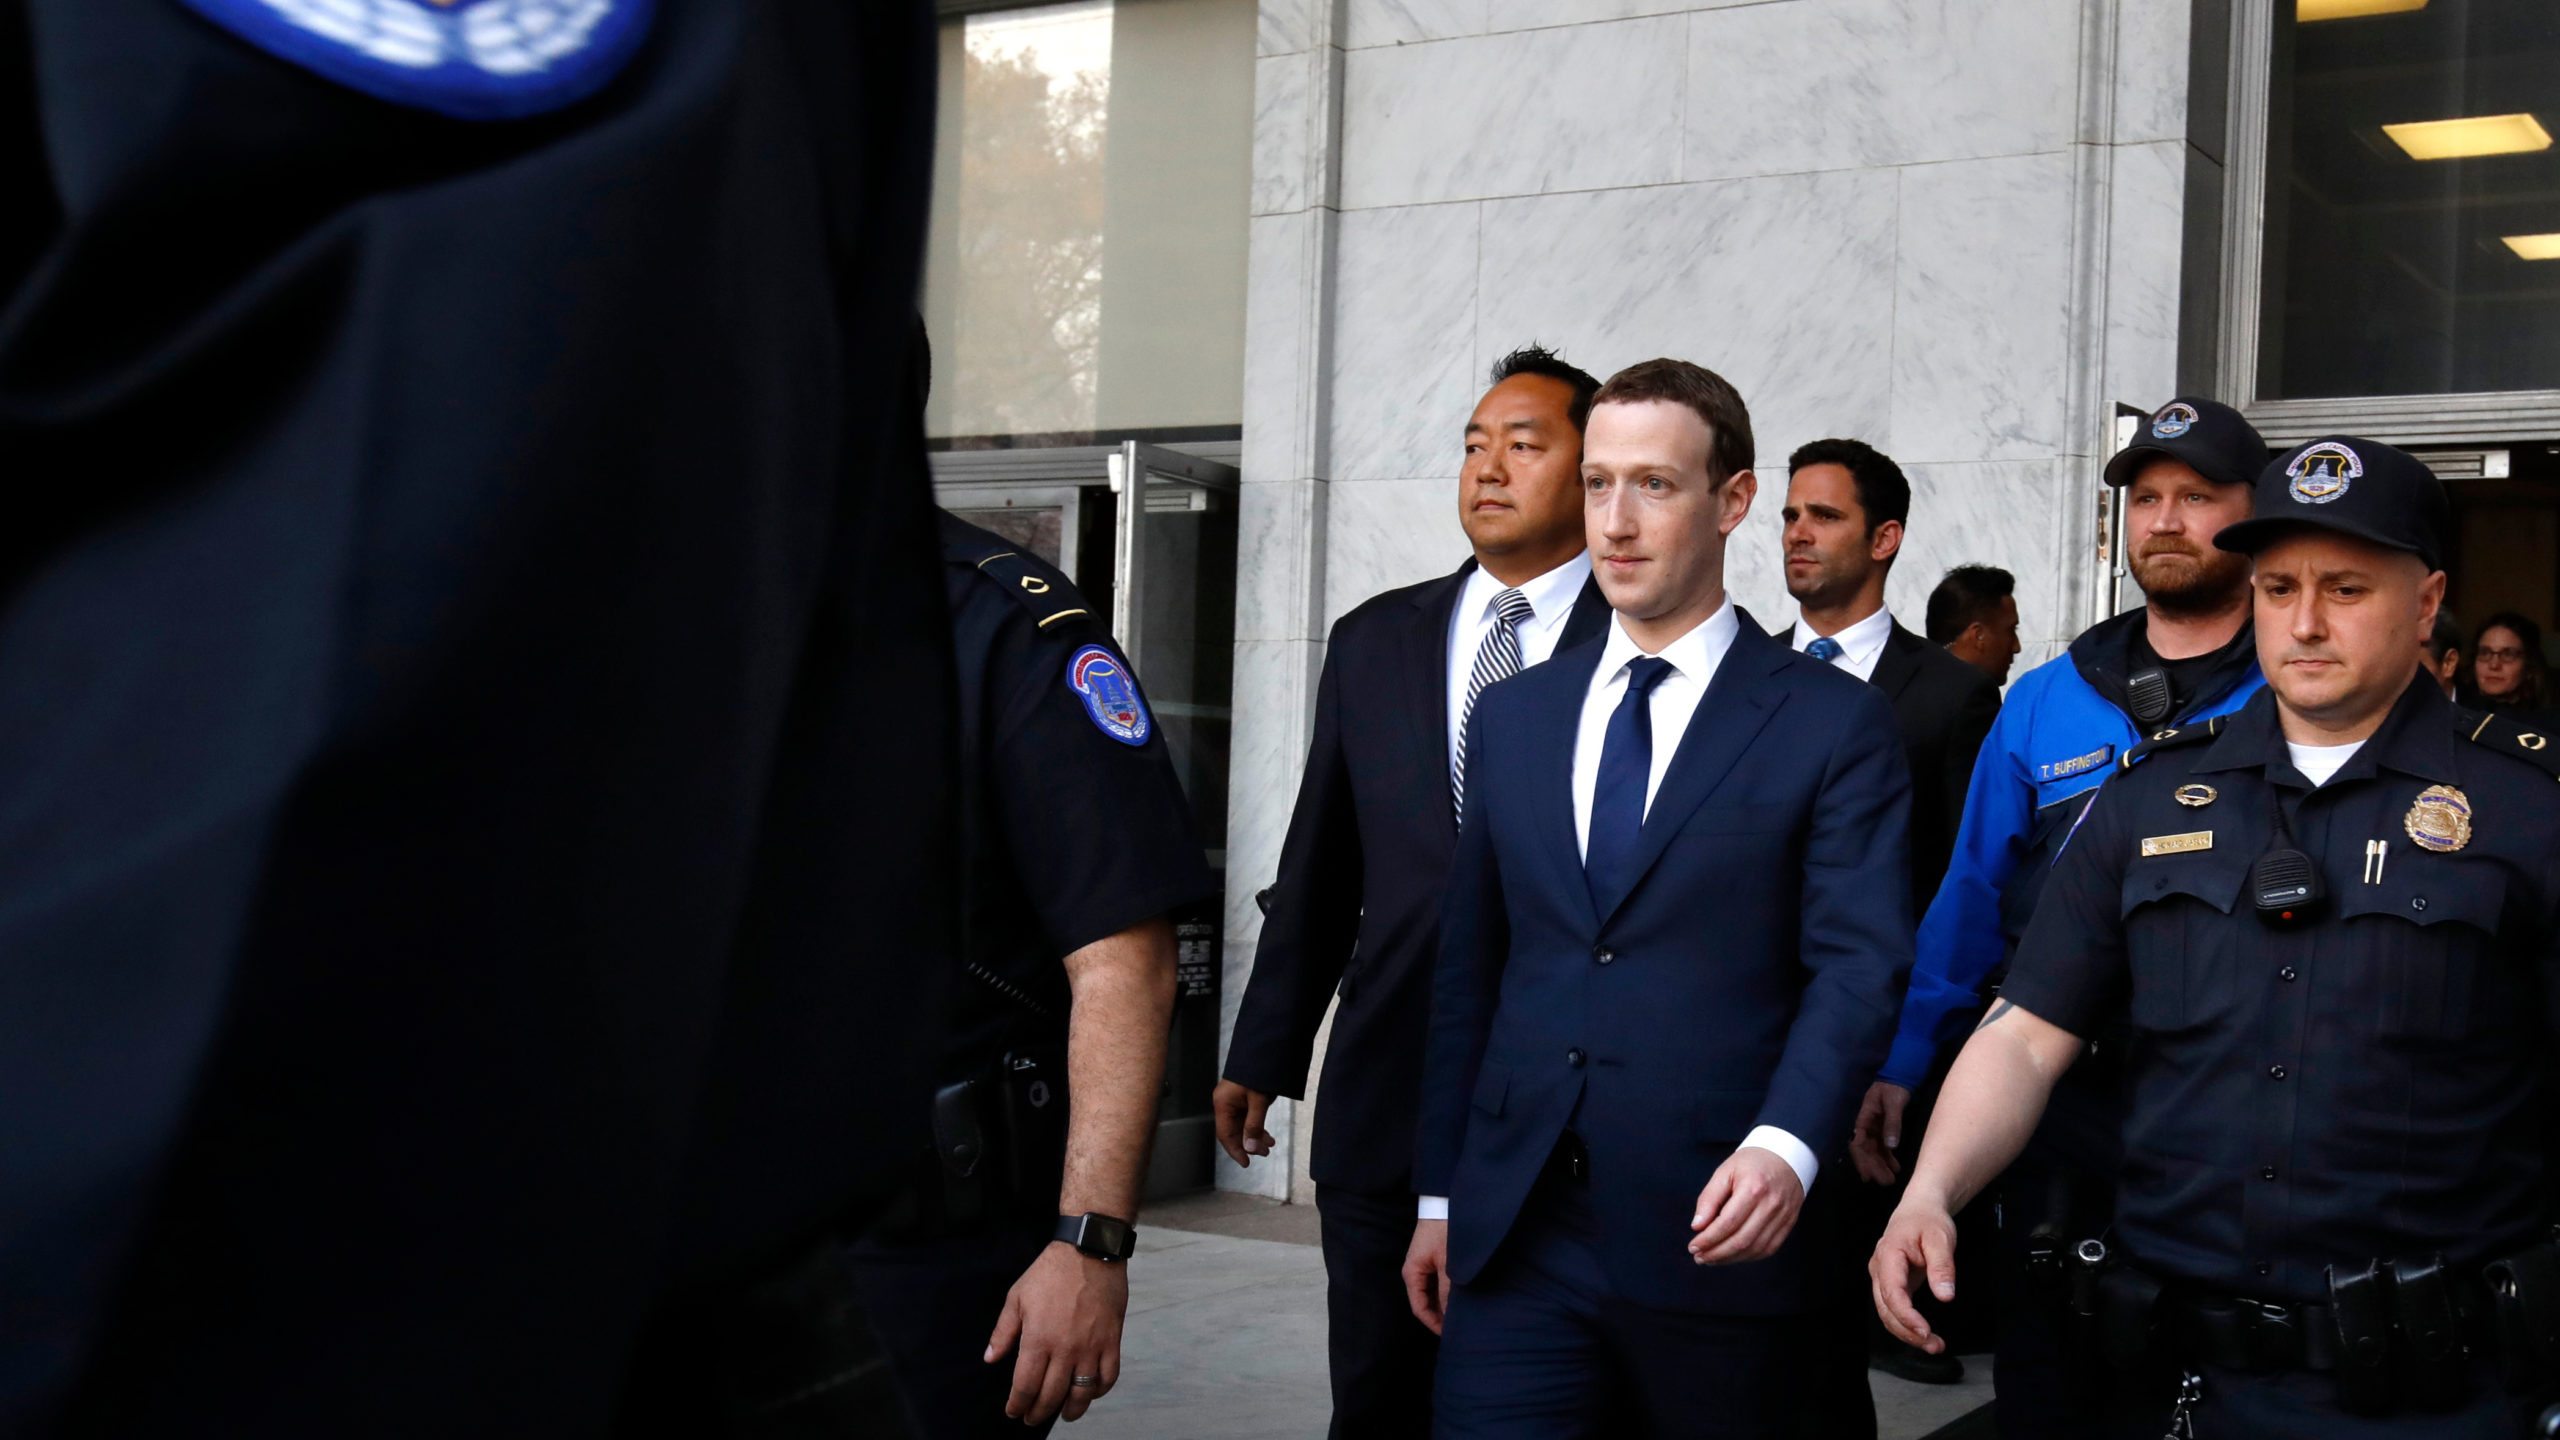 The Giant List Of Crap Mark Zuckerberg Swears He’ll Get Back To Congress On